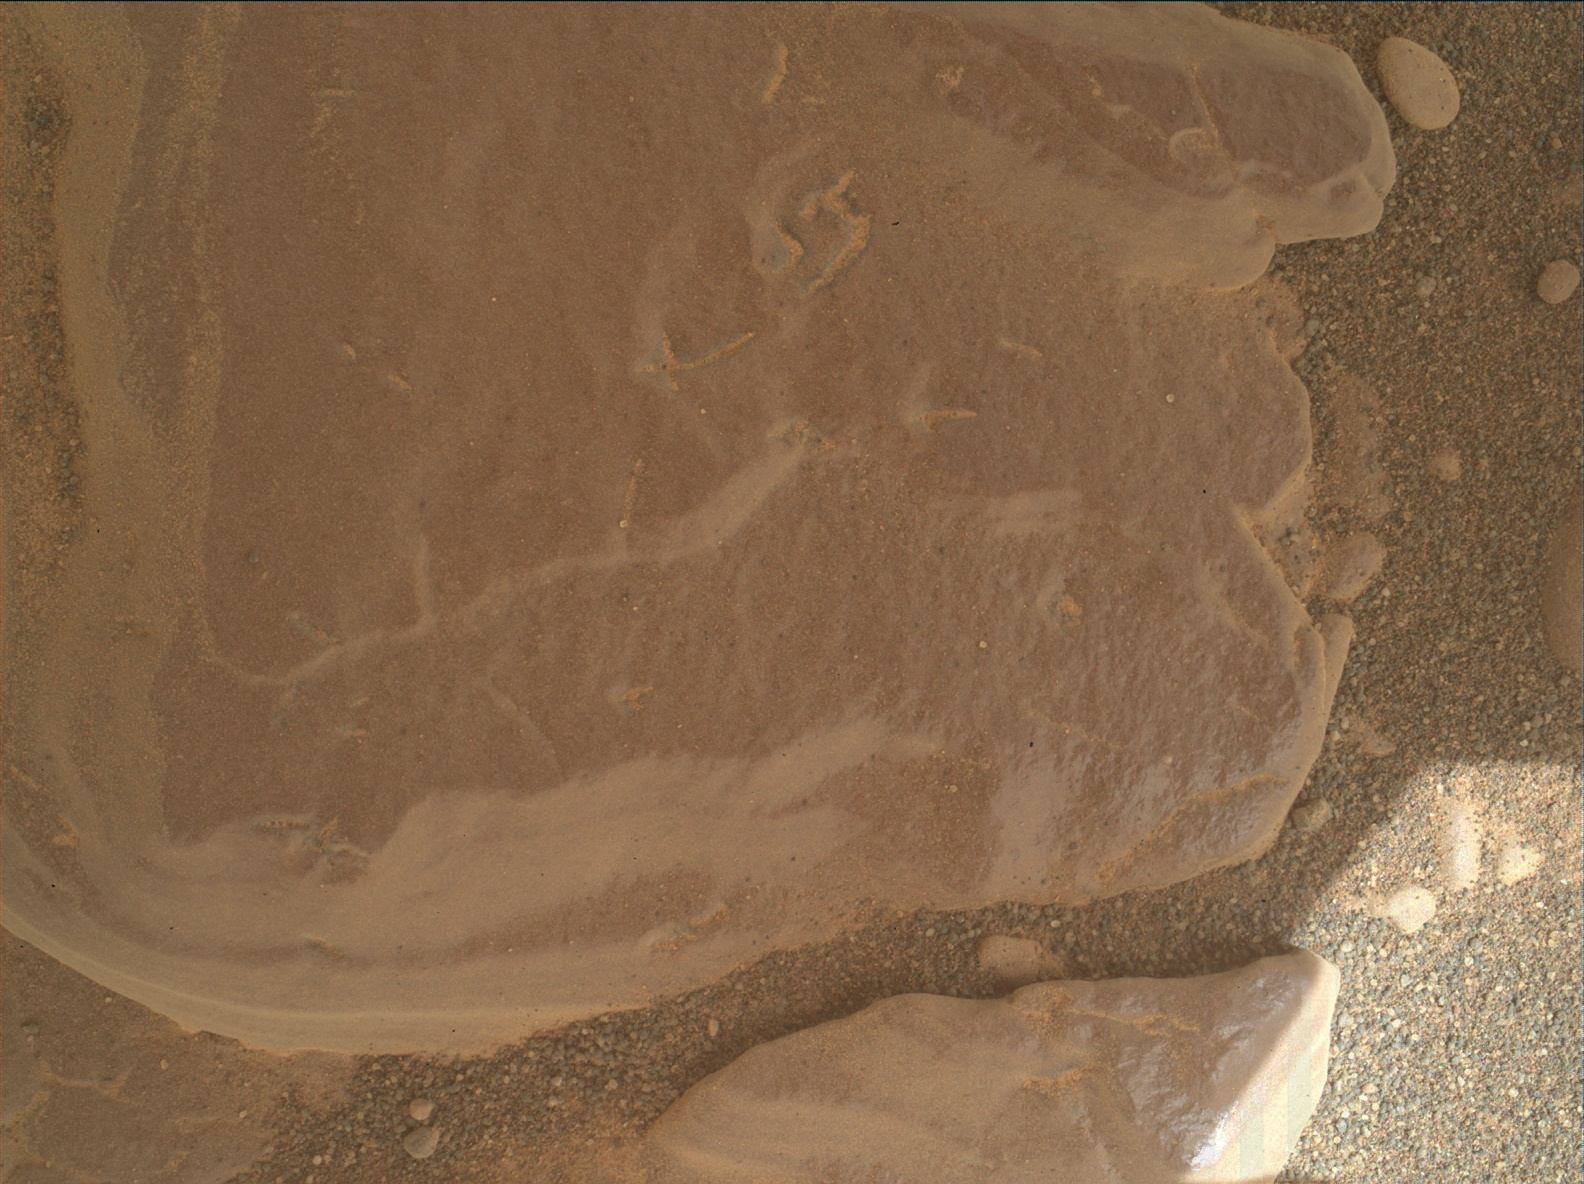 Nasa's Mars rover Curiosity acquired this image using its Mars Hand Lens Imager (MAHLI) on Sol 2933